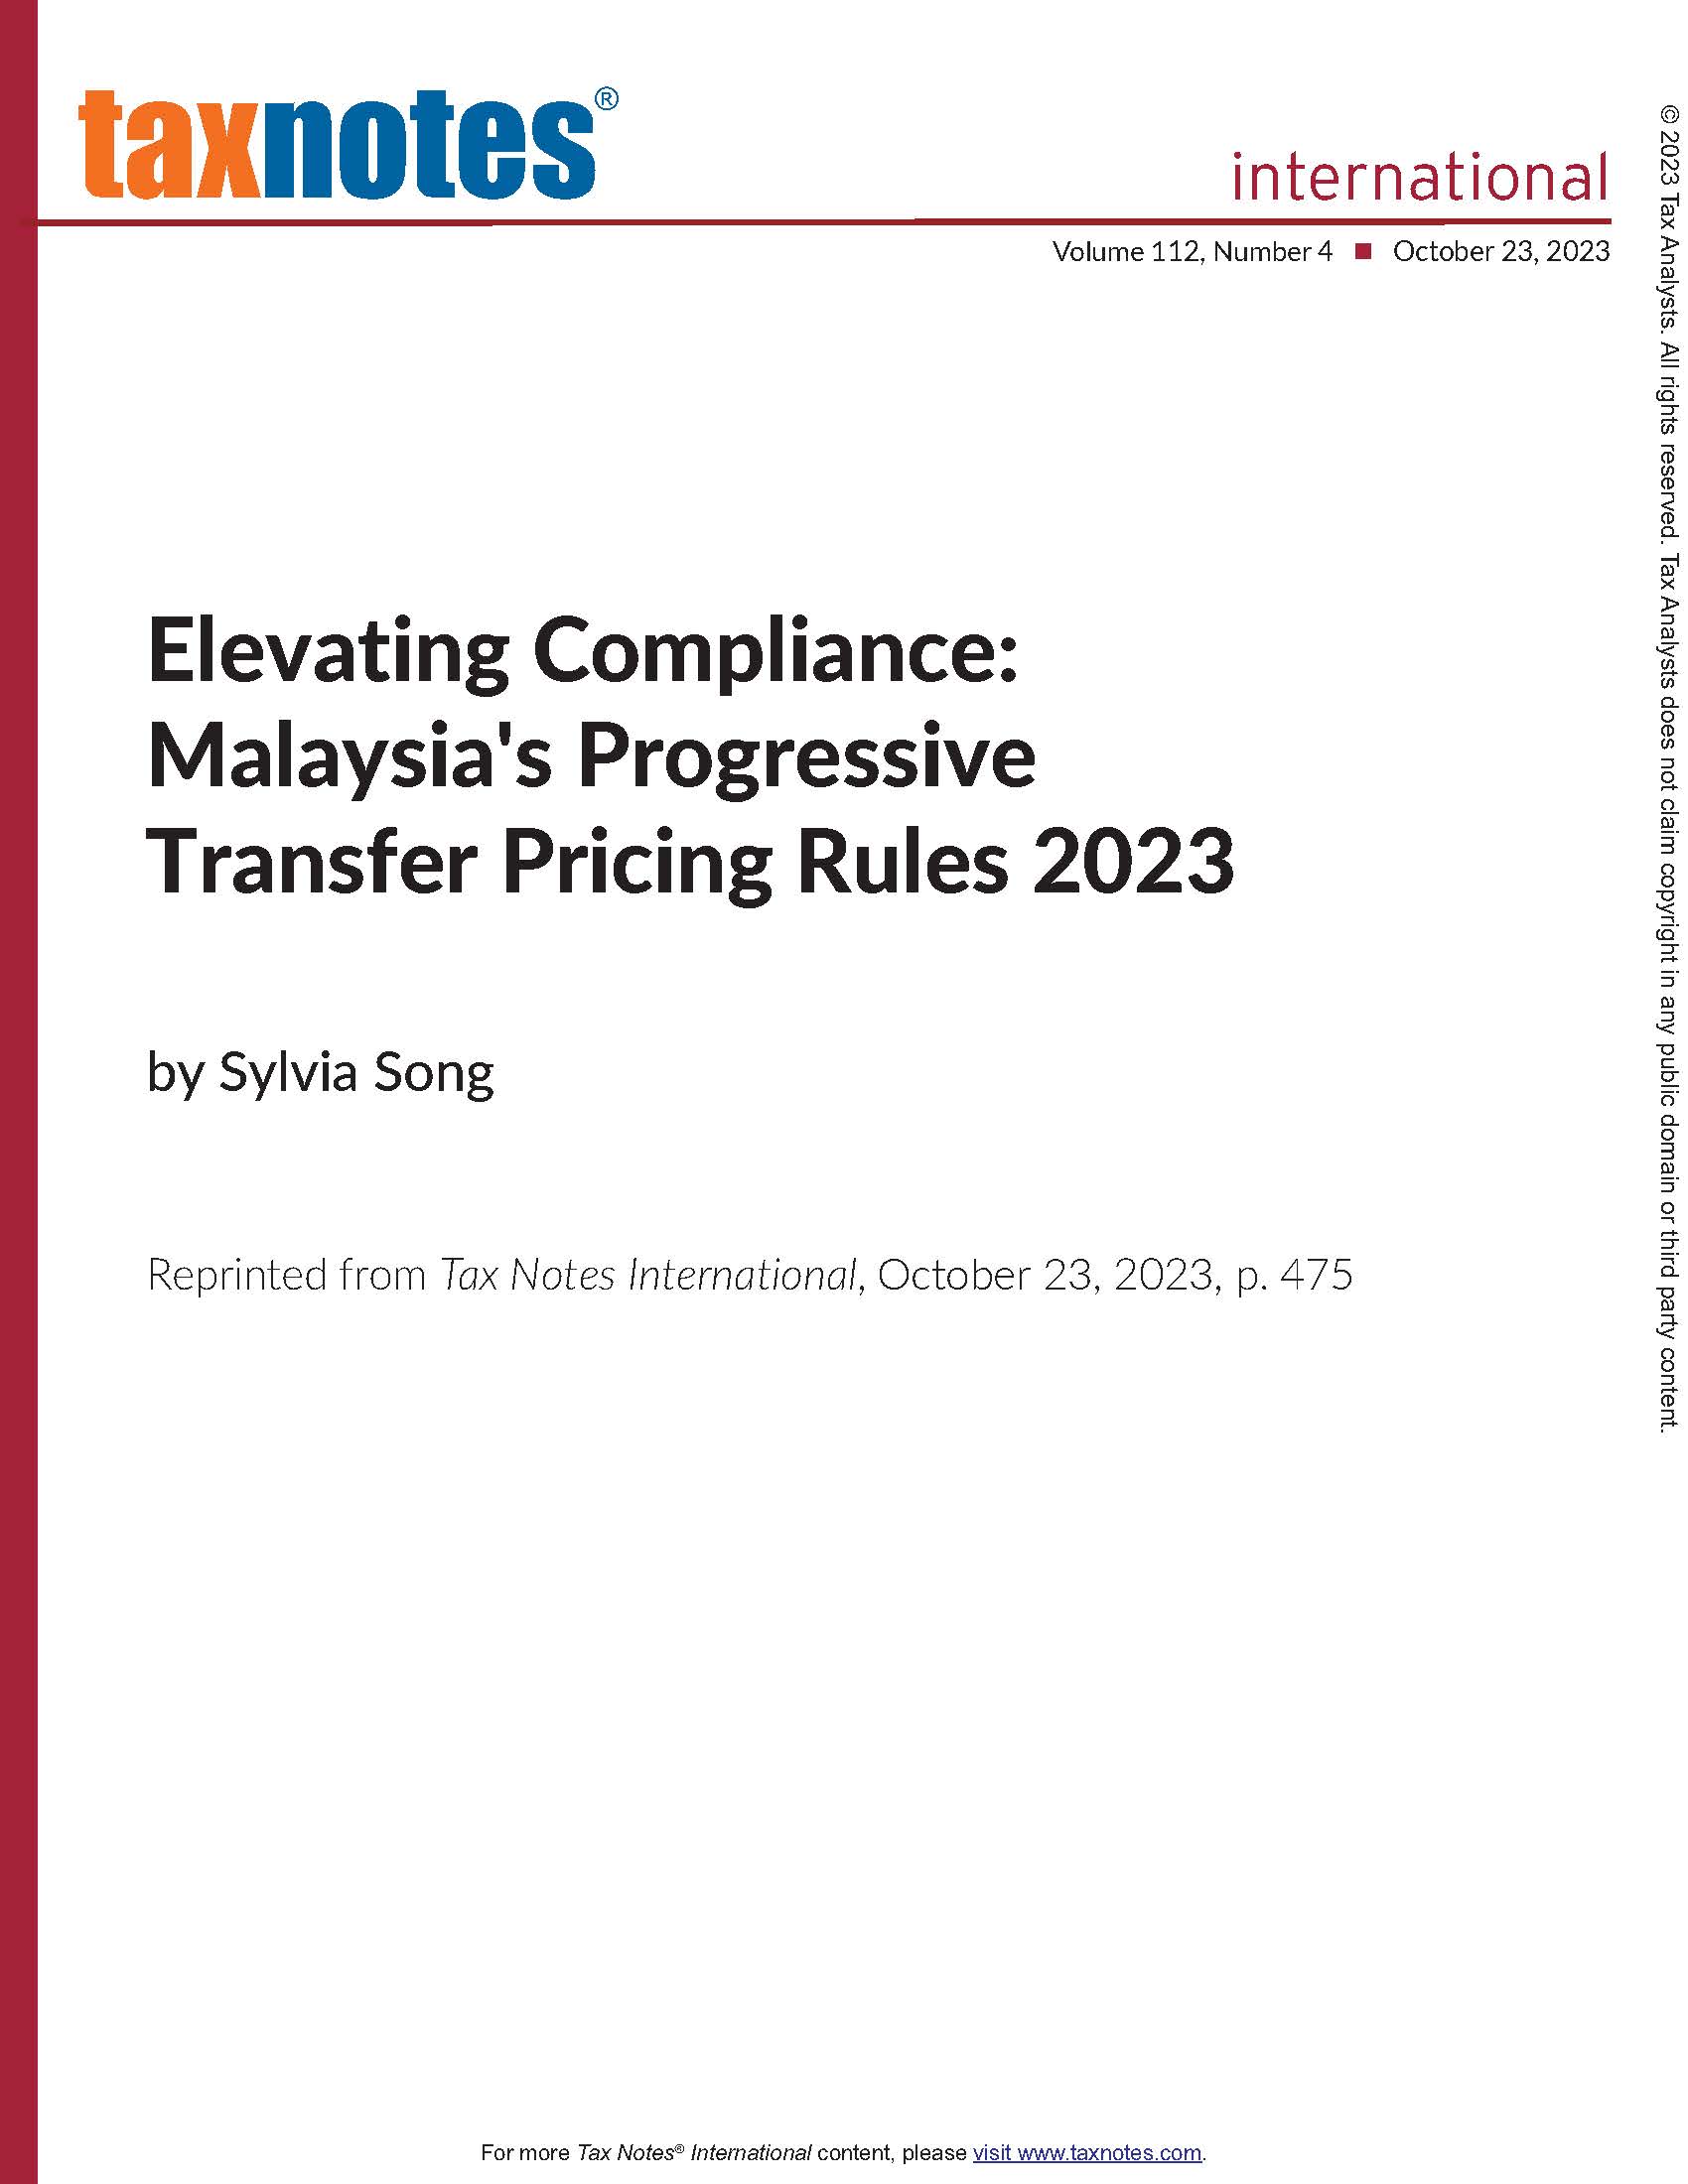 Elevating Compliance - Malaysia's Progressive Transfer Pricing Rules 2023 cover